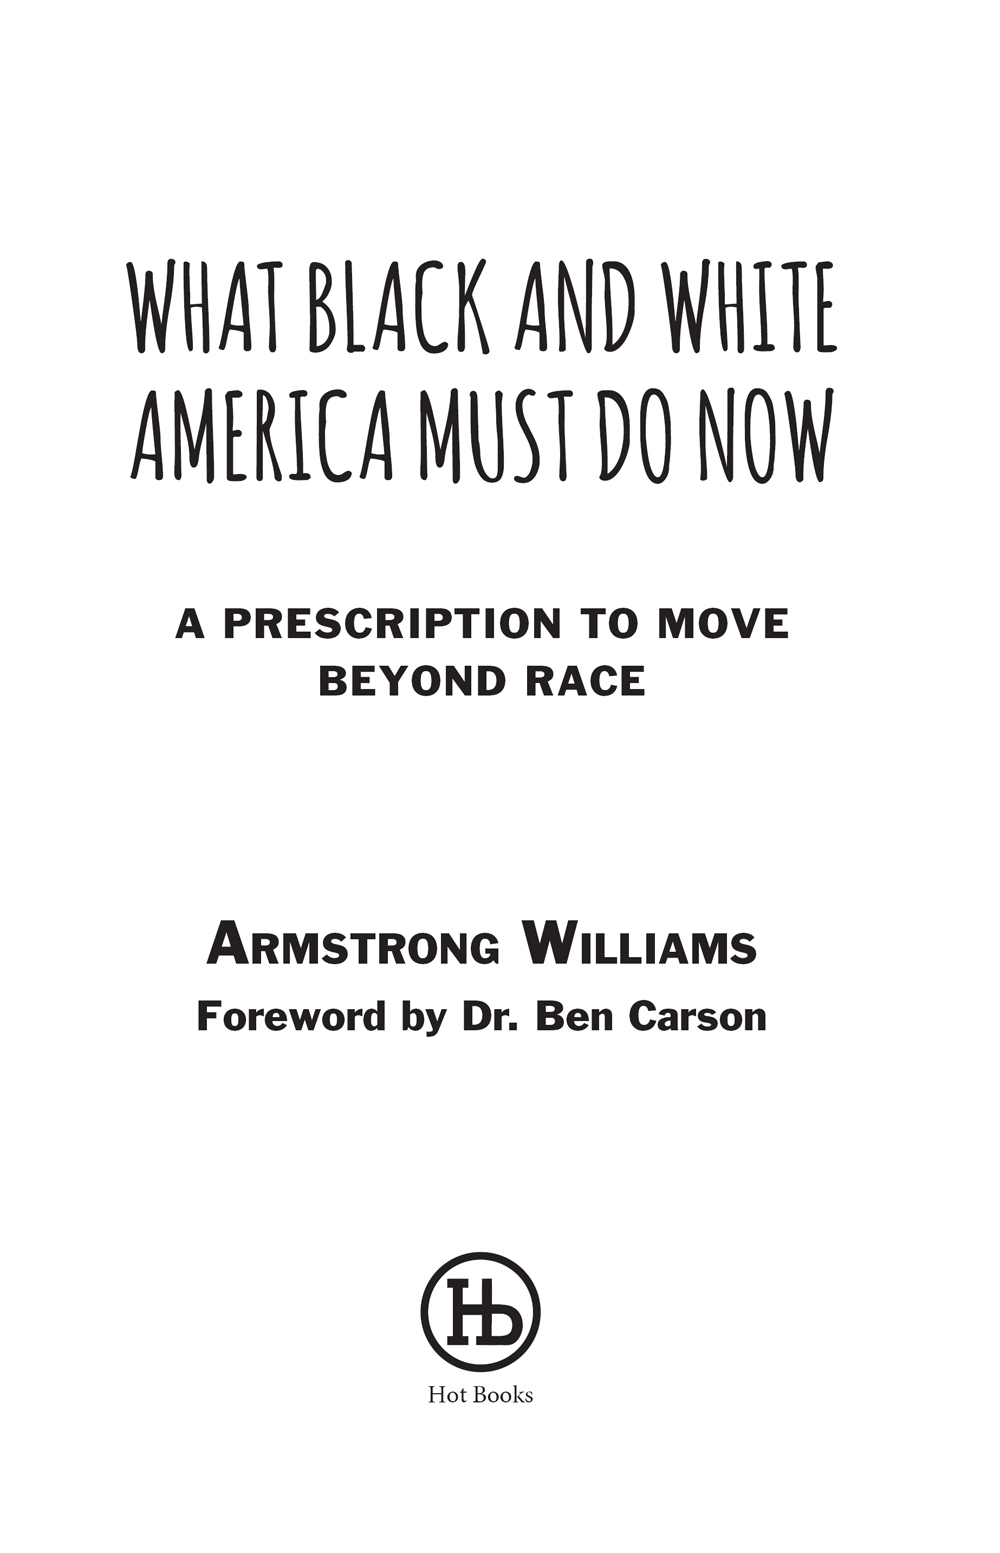 Copyright 2020 by Armstrong Williams Foreword copyright 2020 by Dr Ben Carson - photo 3